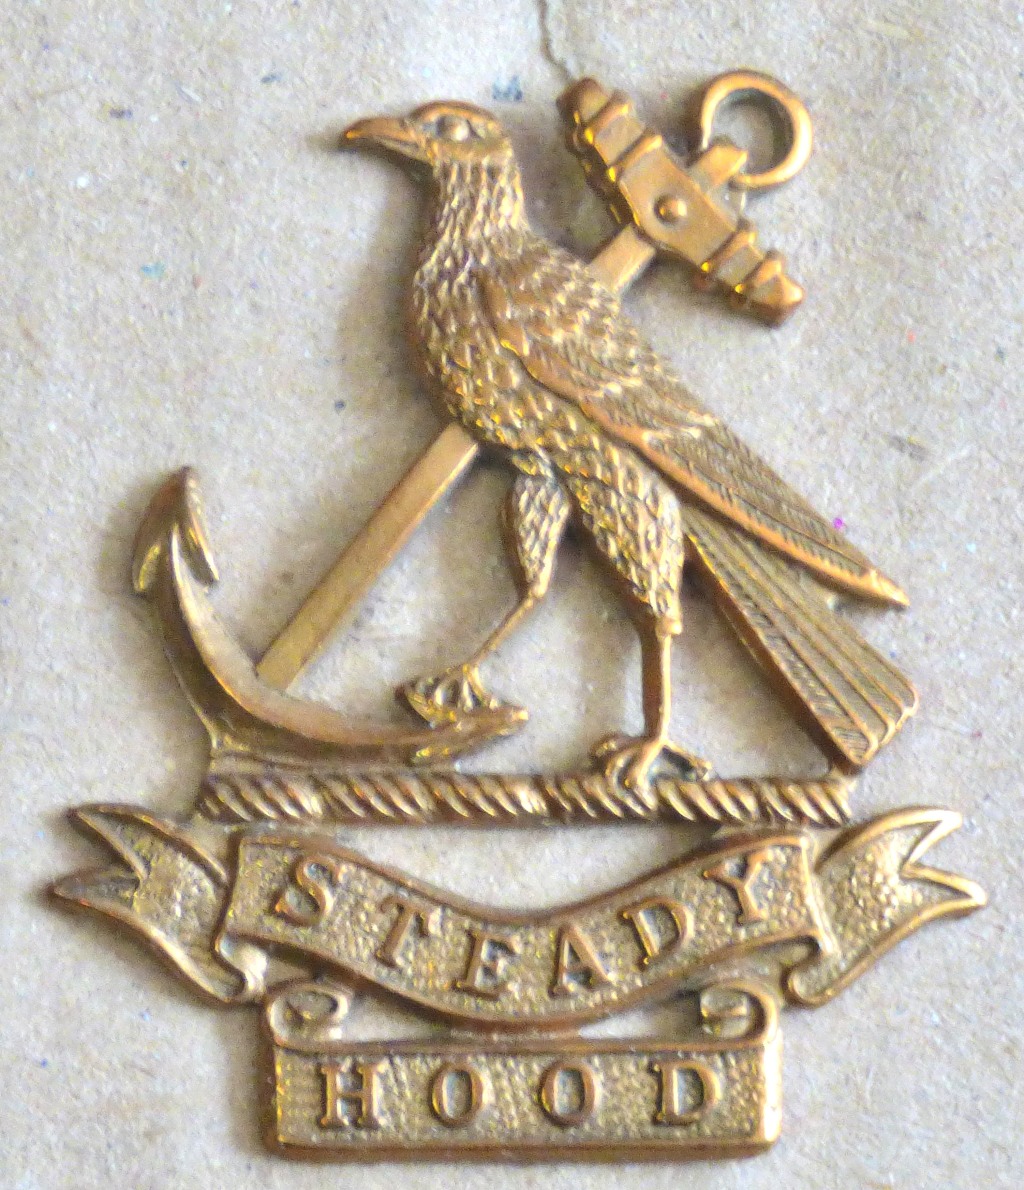 British Royal Navy Cap badges (7) scarce badges, a couple restrikes but a lovely selection. HOWE, - Image 6 of 8